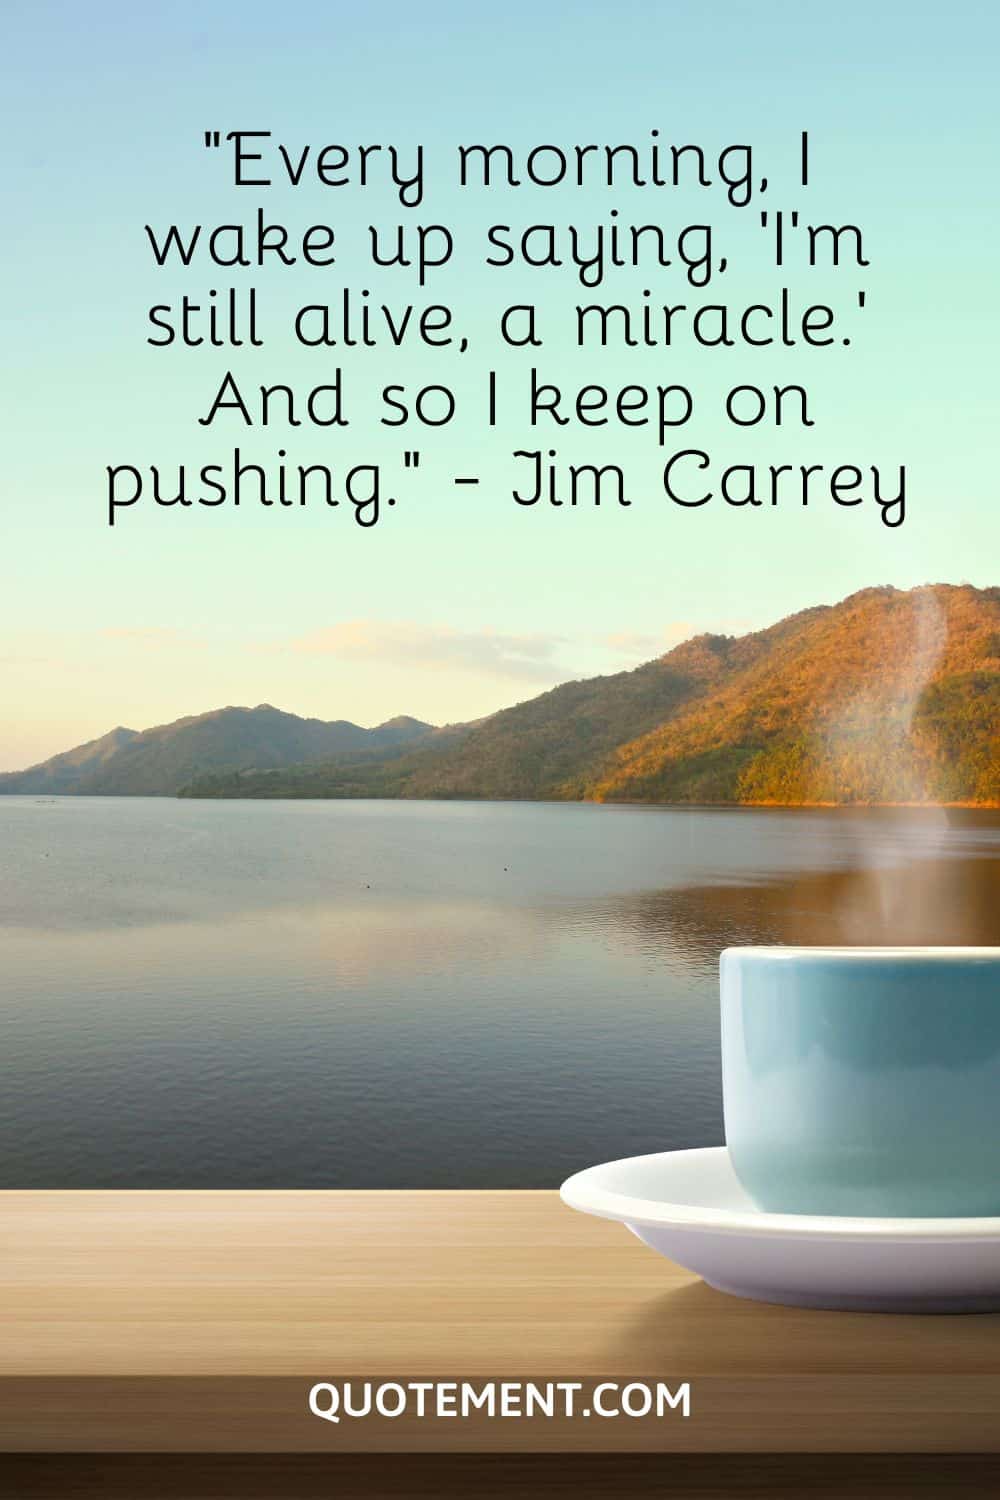 Every morning, I wake up saying, 'I’m still alive, a miracle.'